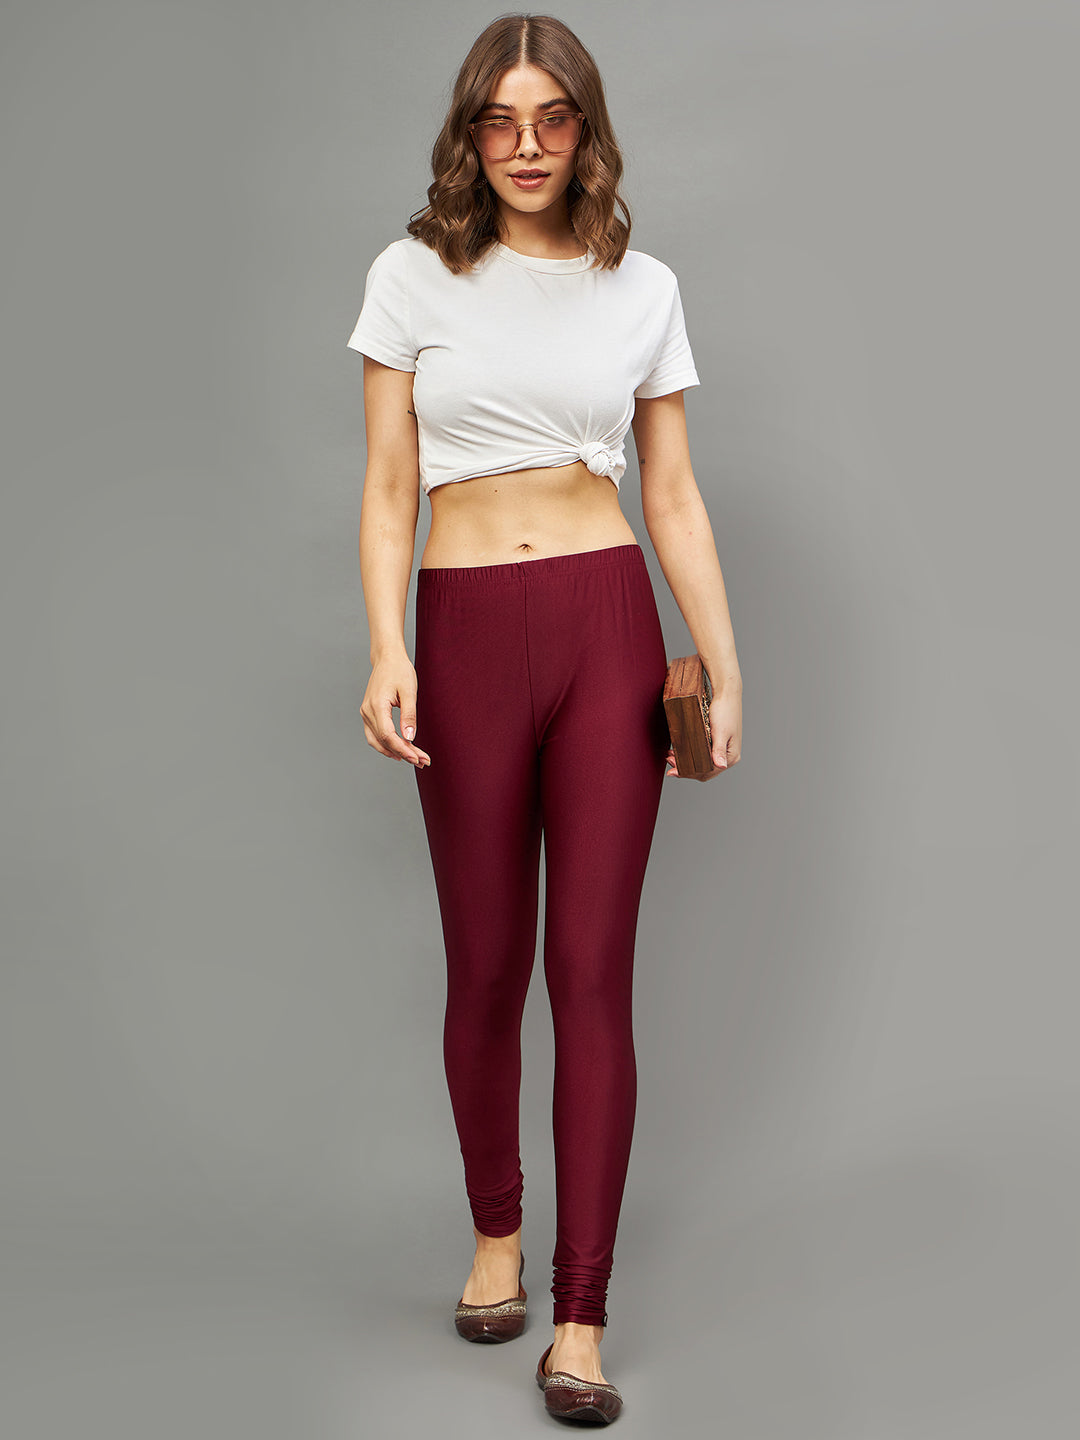 How to Wear Burgundy/Maroon Leggings All through the Year